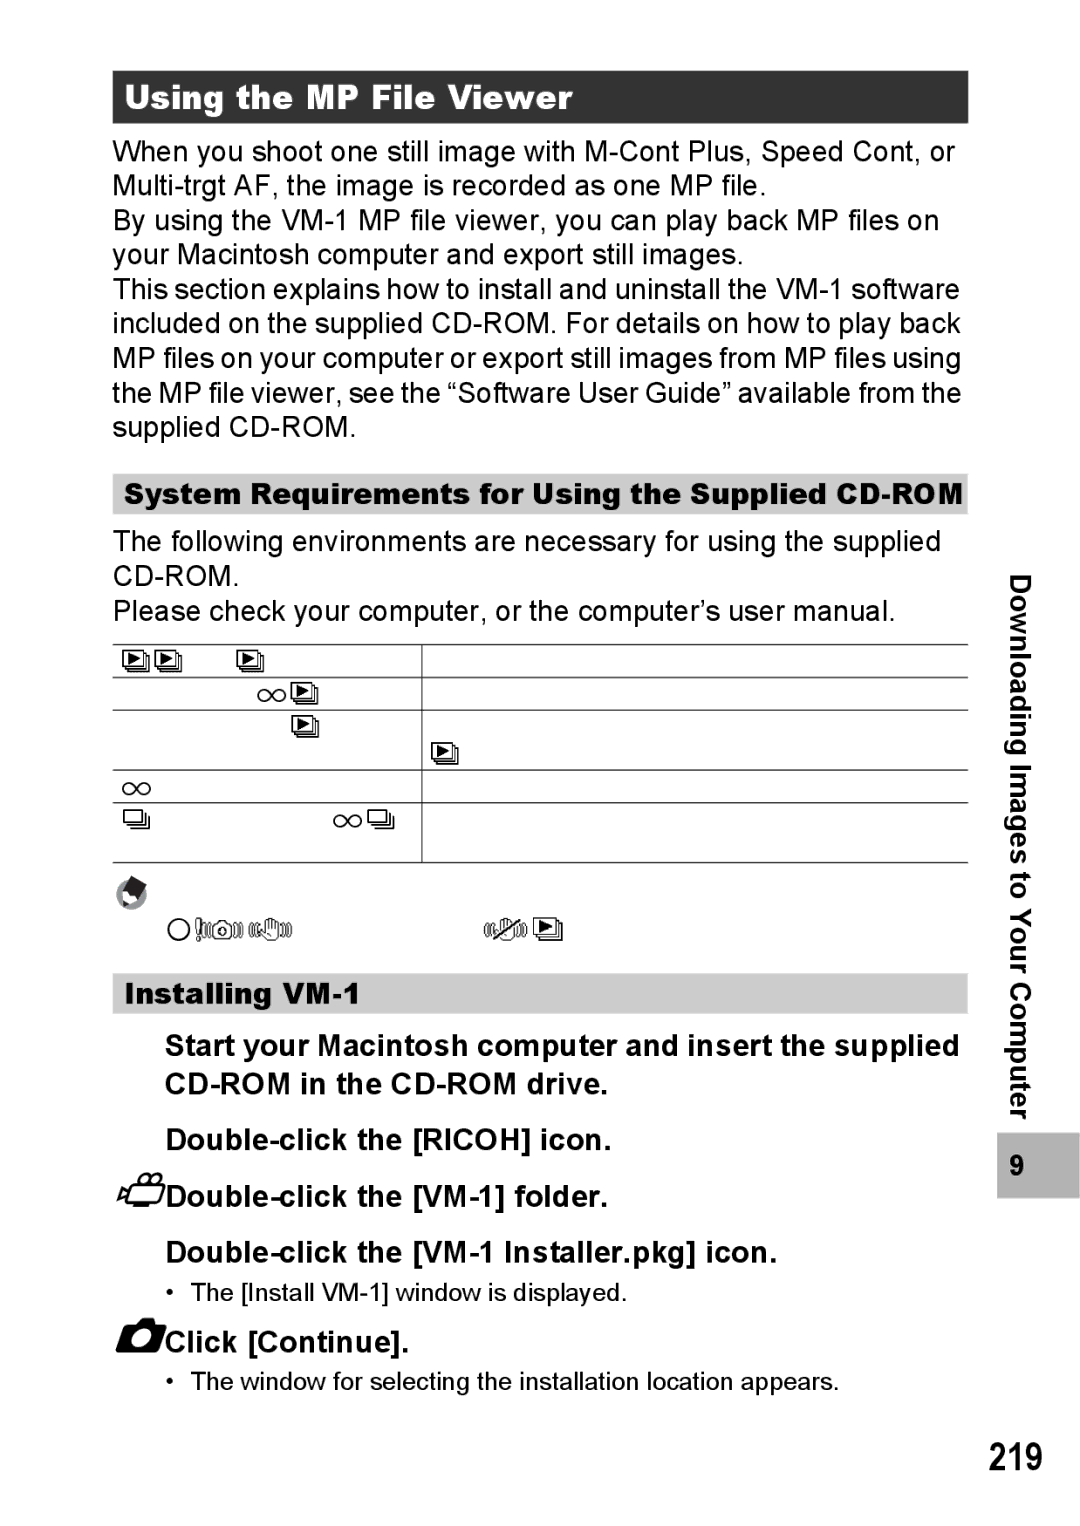 Samsung CX2 manual 219, Using the MP File Viewer, Click Continue 